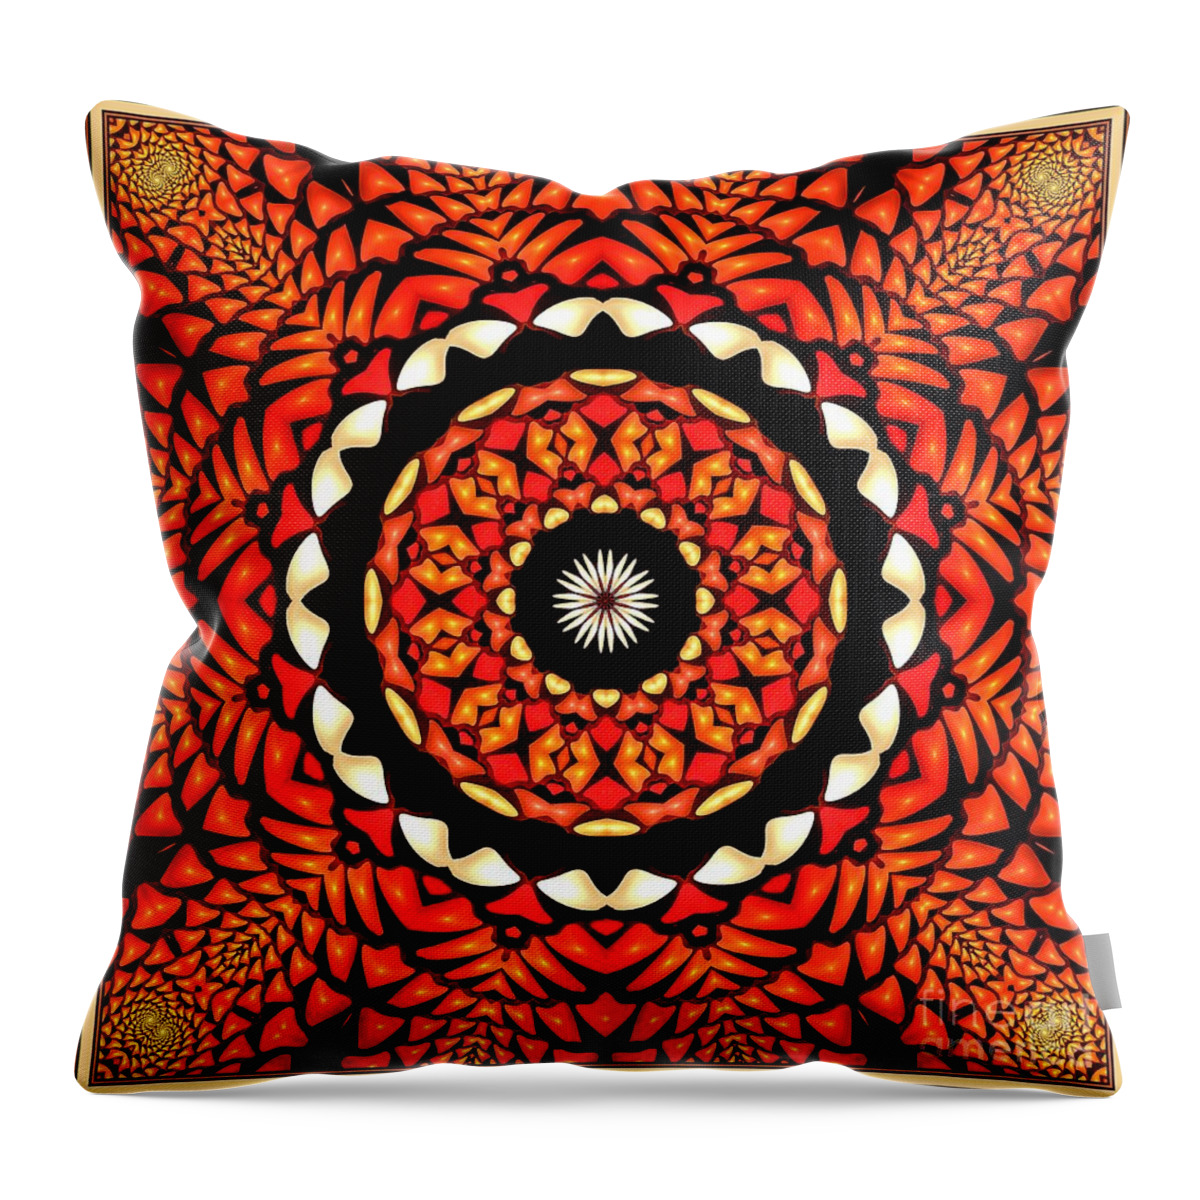  Throw Pillow featuring the digital art Chiclets K12-45 by Doug Morgan